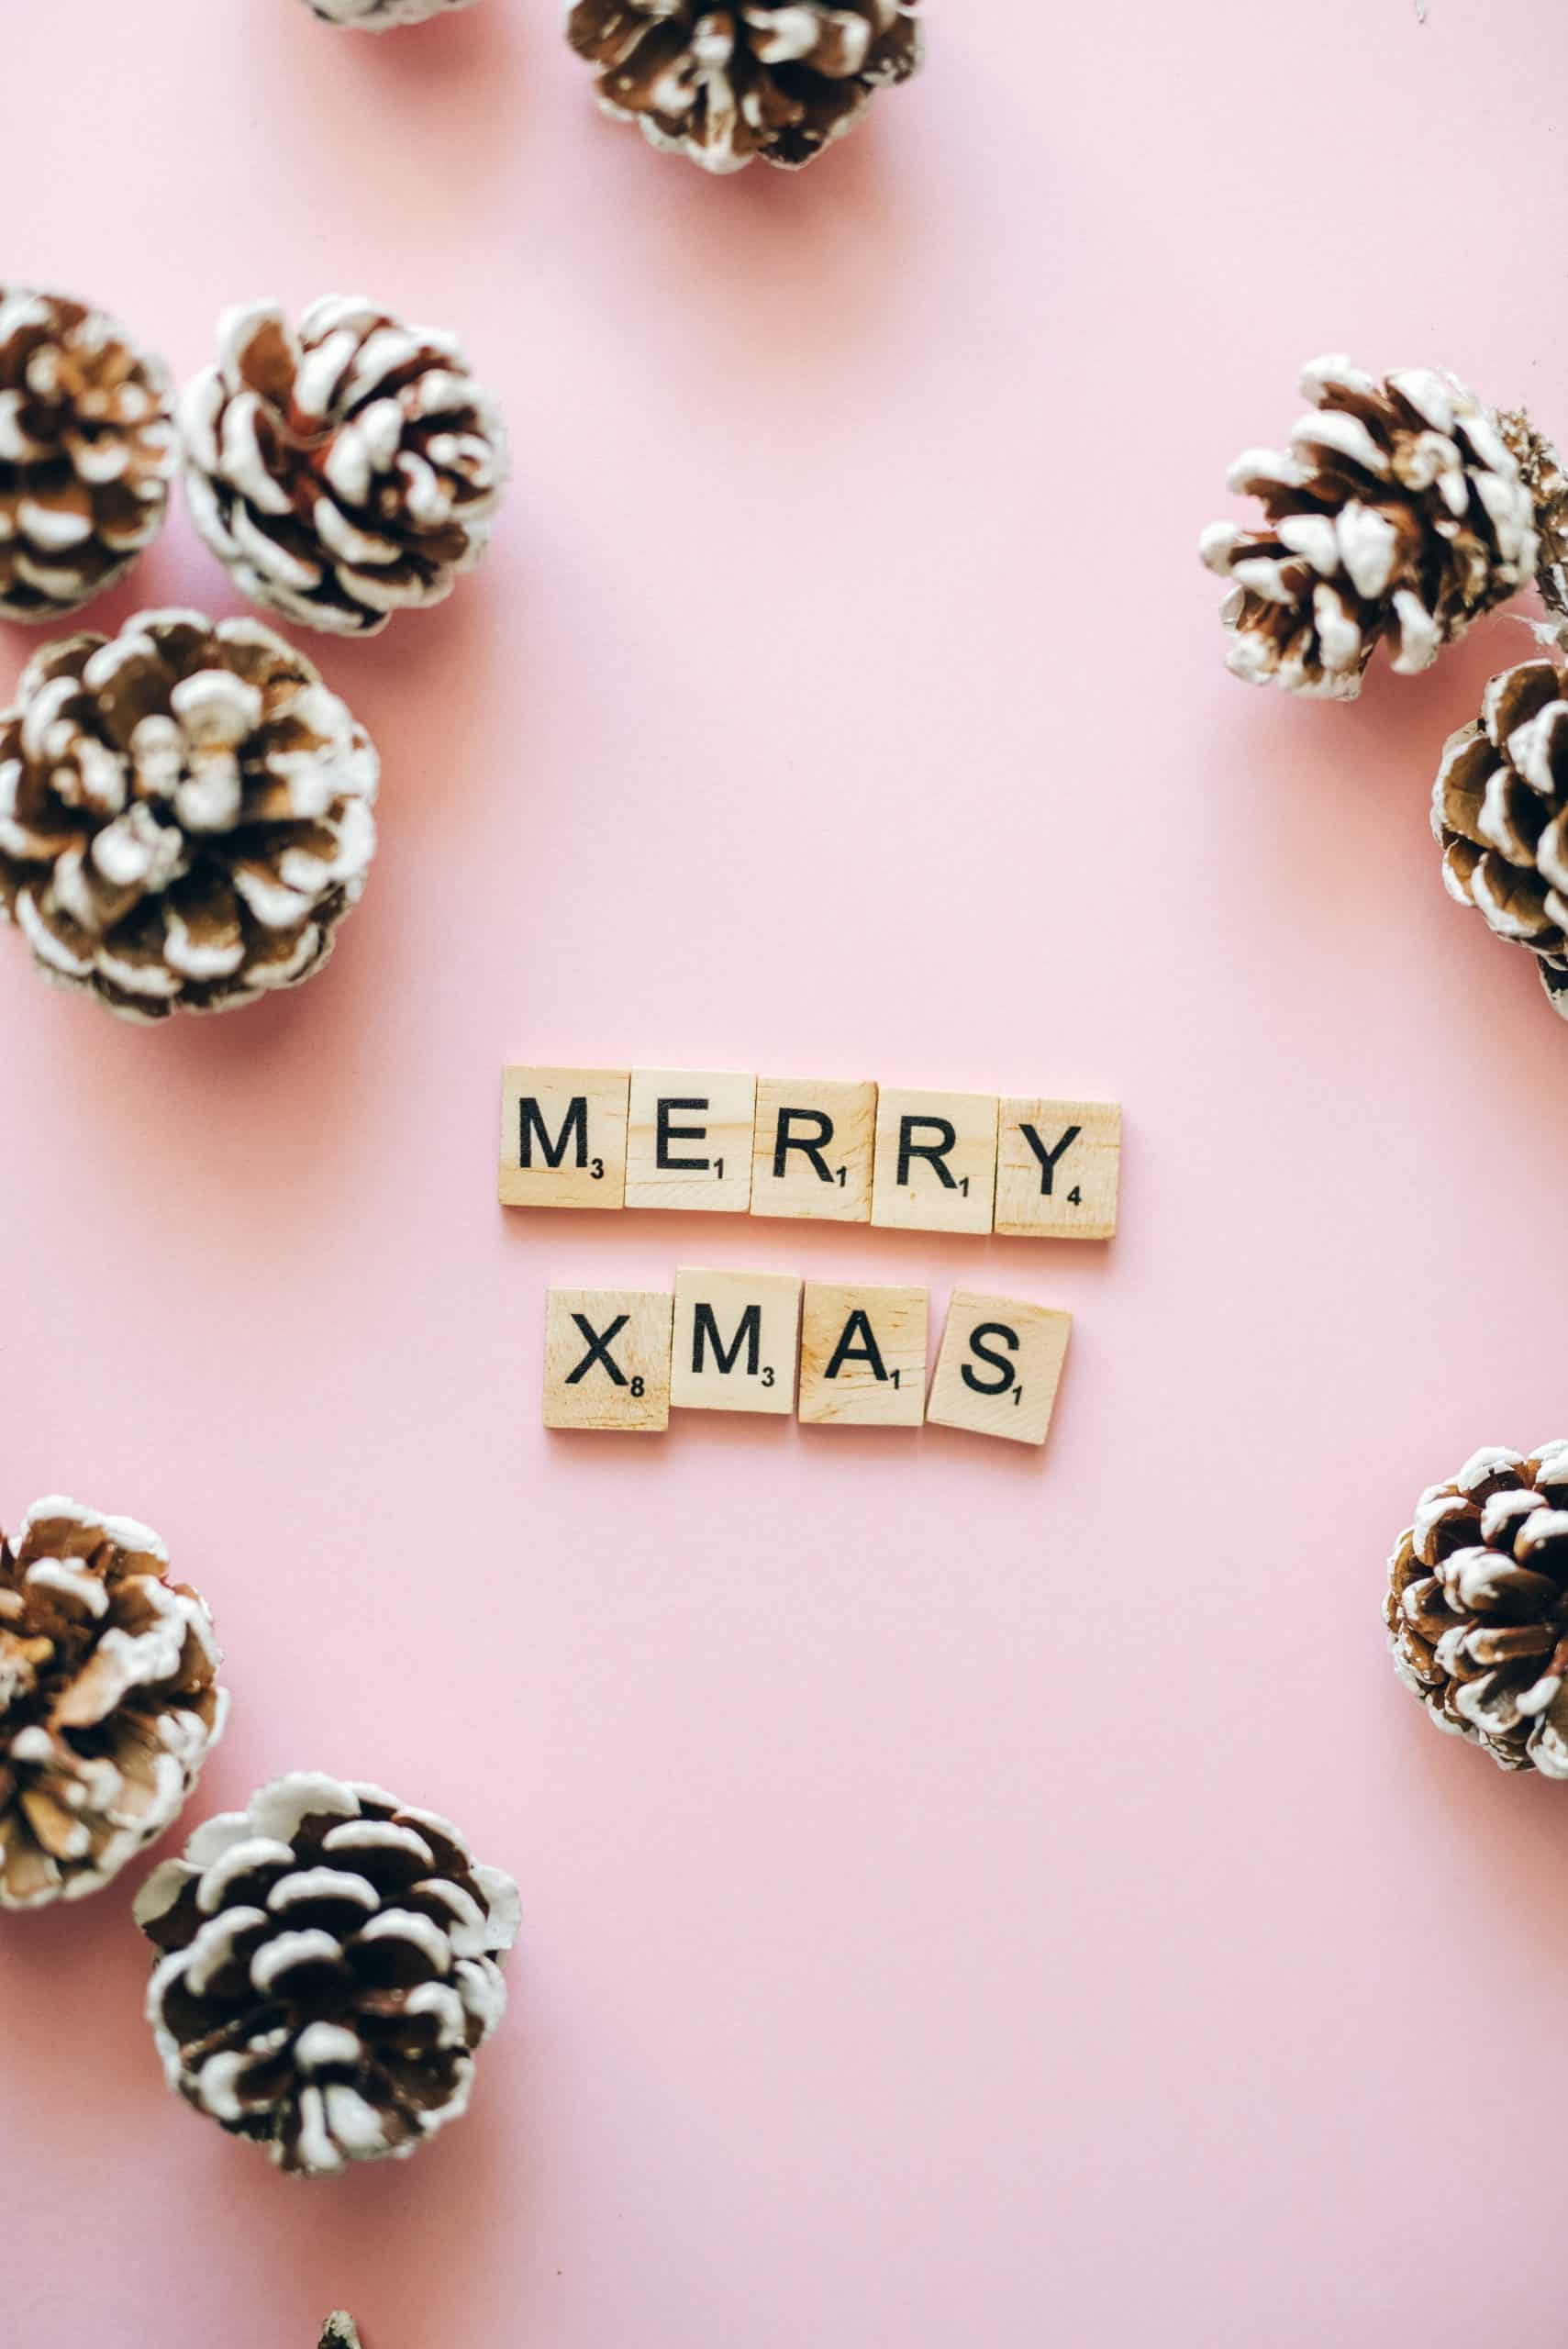 A pink background with christmas words and cones - Christmas iPhone, Christmas, candy cane, cute Christmas, cute iPhone, pretty, white Christmas, nails